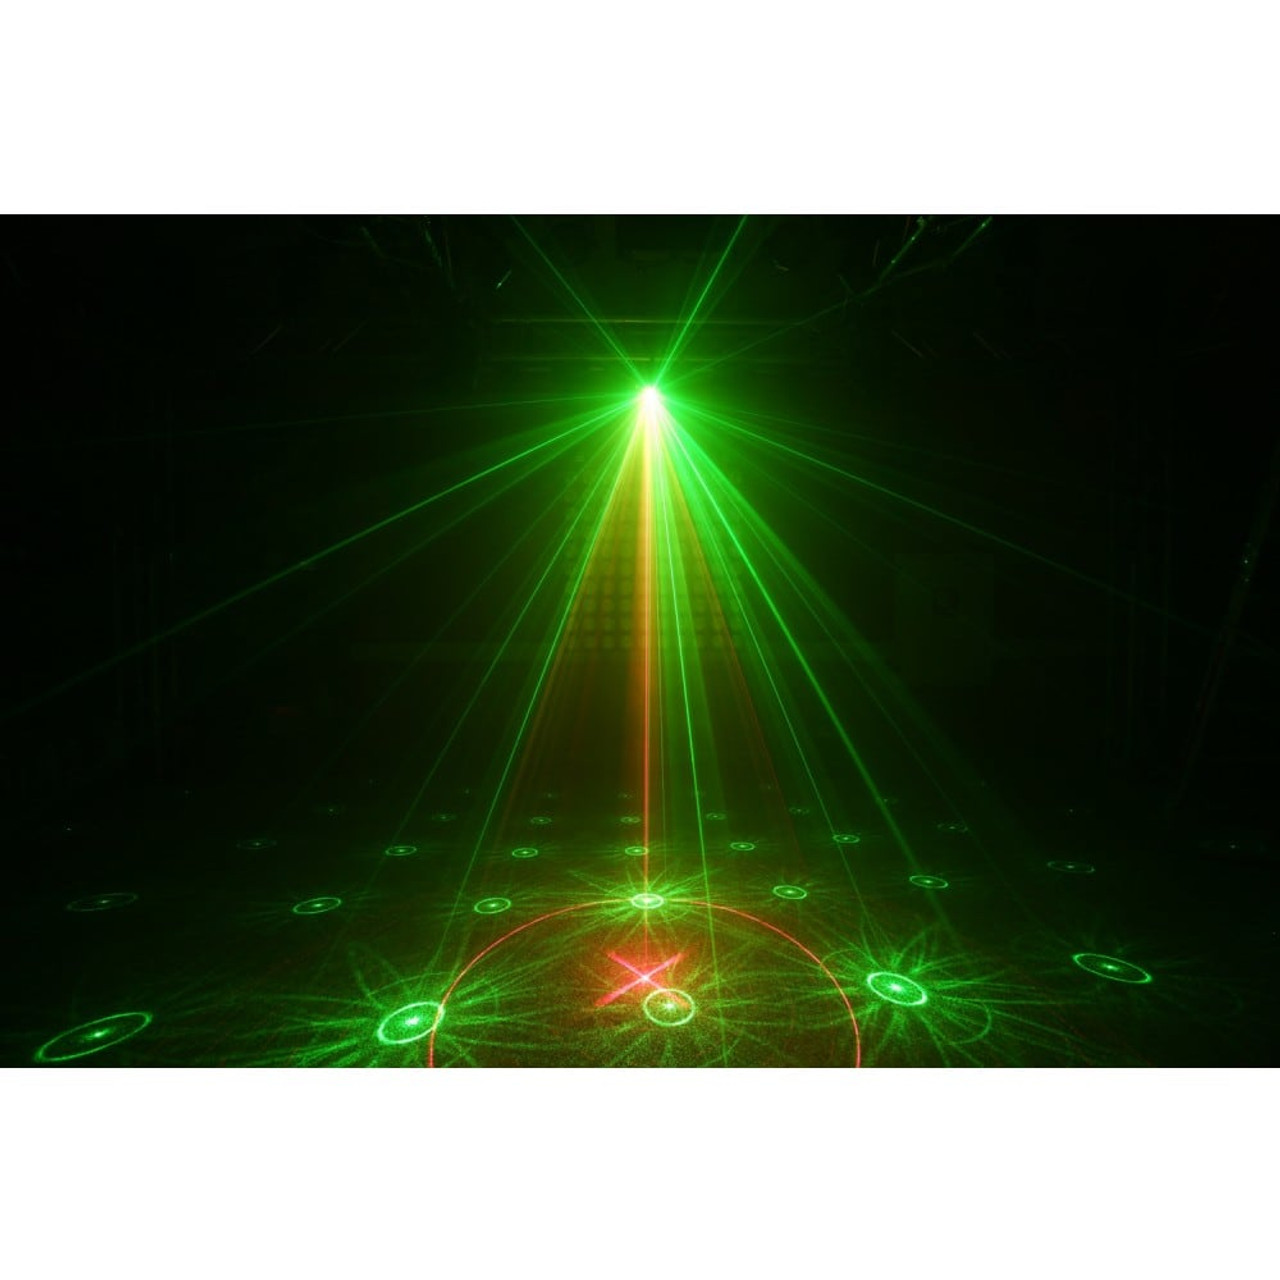 Beamz SURTUR-II Laser Light With Wash Dual Red and Green Multipoint